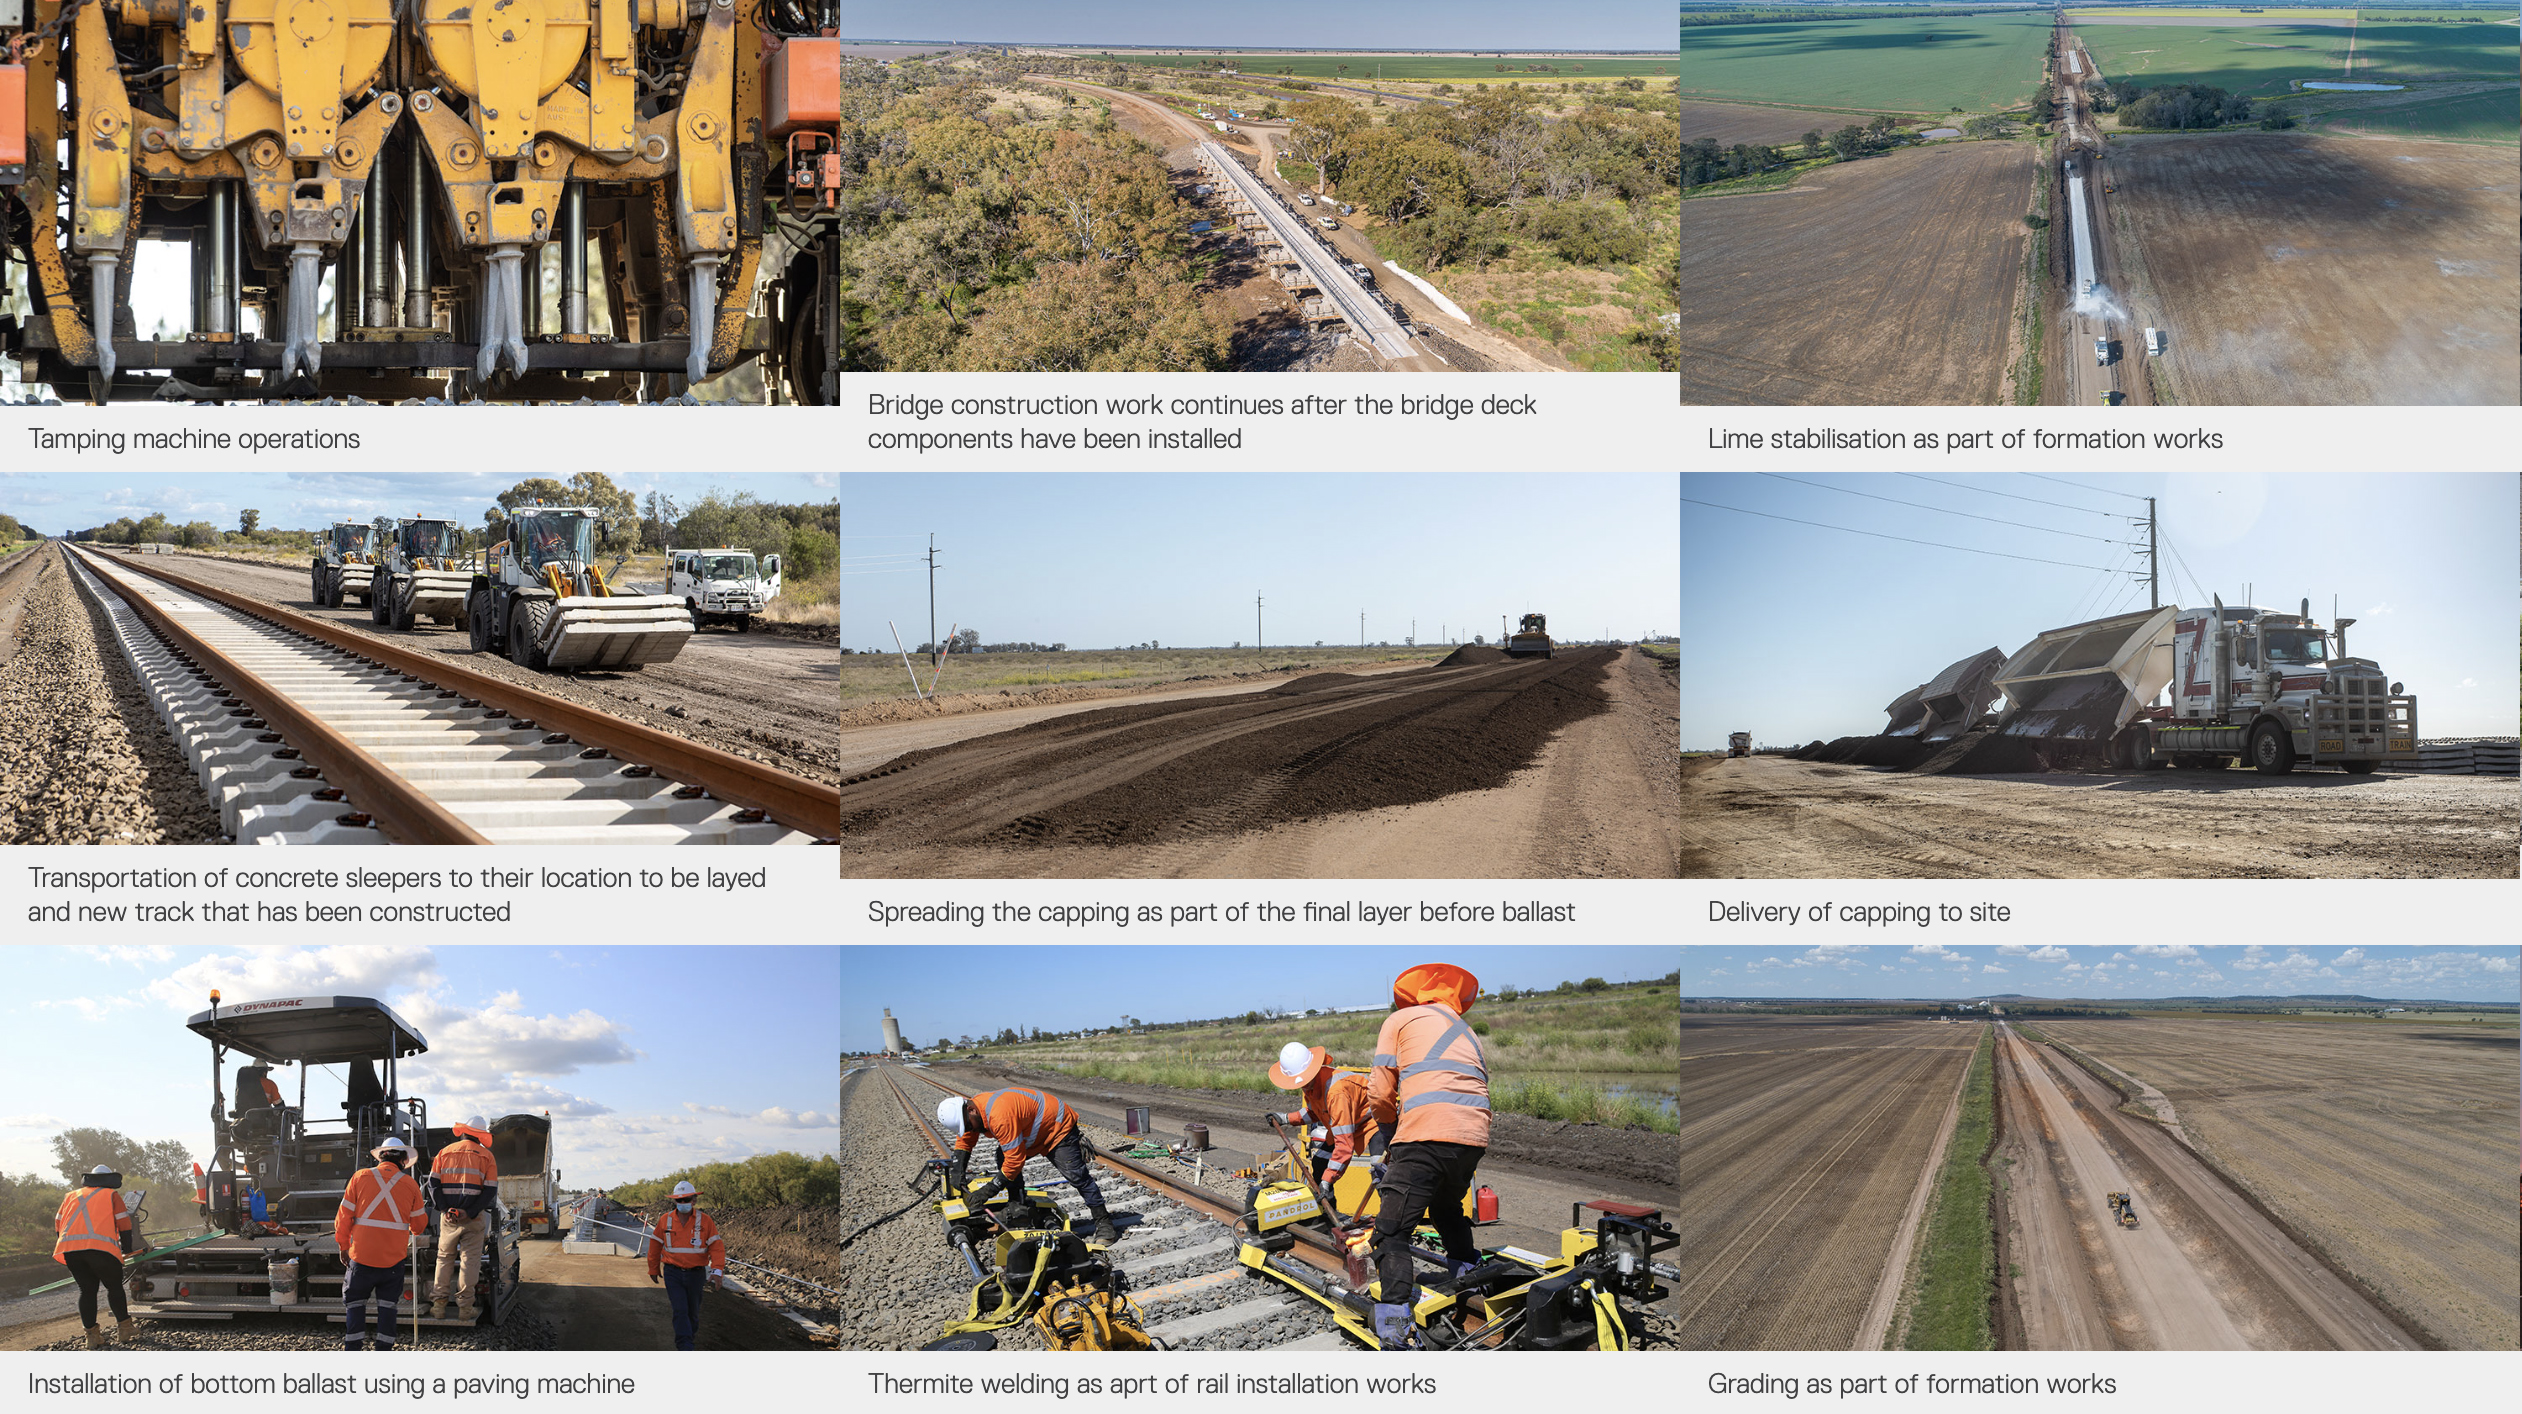 Screen capture of photogallery thumbnails images showing construction of railway